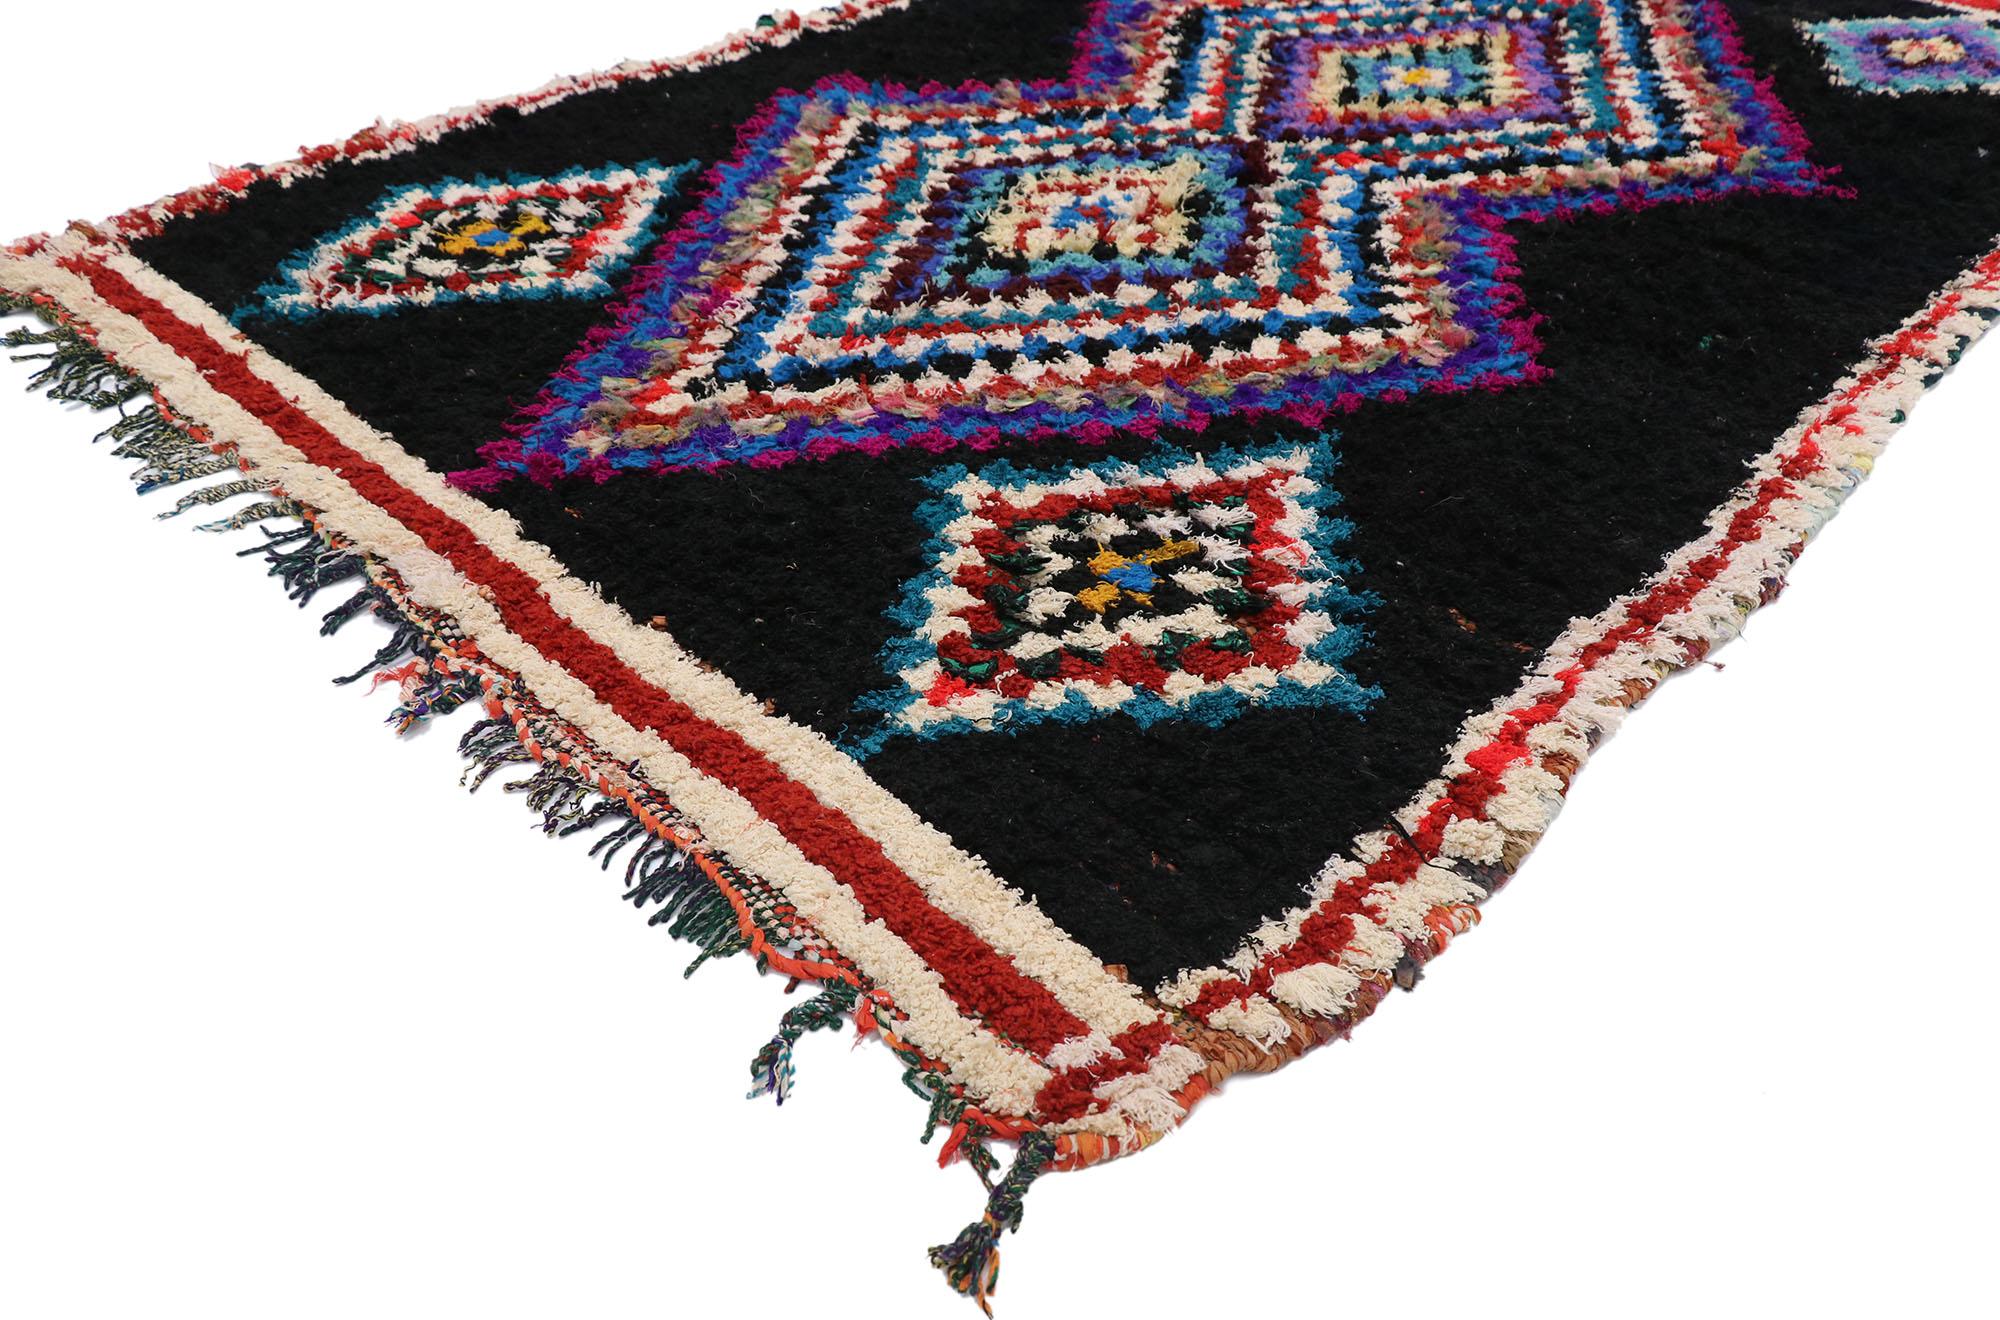 20442 Vintage Boucherouite Moroccan Azilal Rag Rug, 04'06 x 07'01. Azilal rag rugs, alternatively referred to as Azilal Boucherouite rugs, epitomize a commitment to sustainable craftsmanship originating from Morocco's Azilal region nestled within